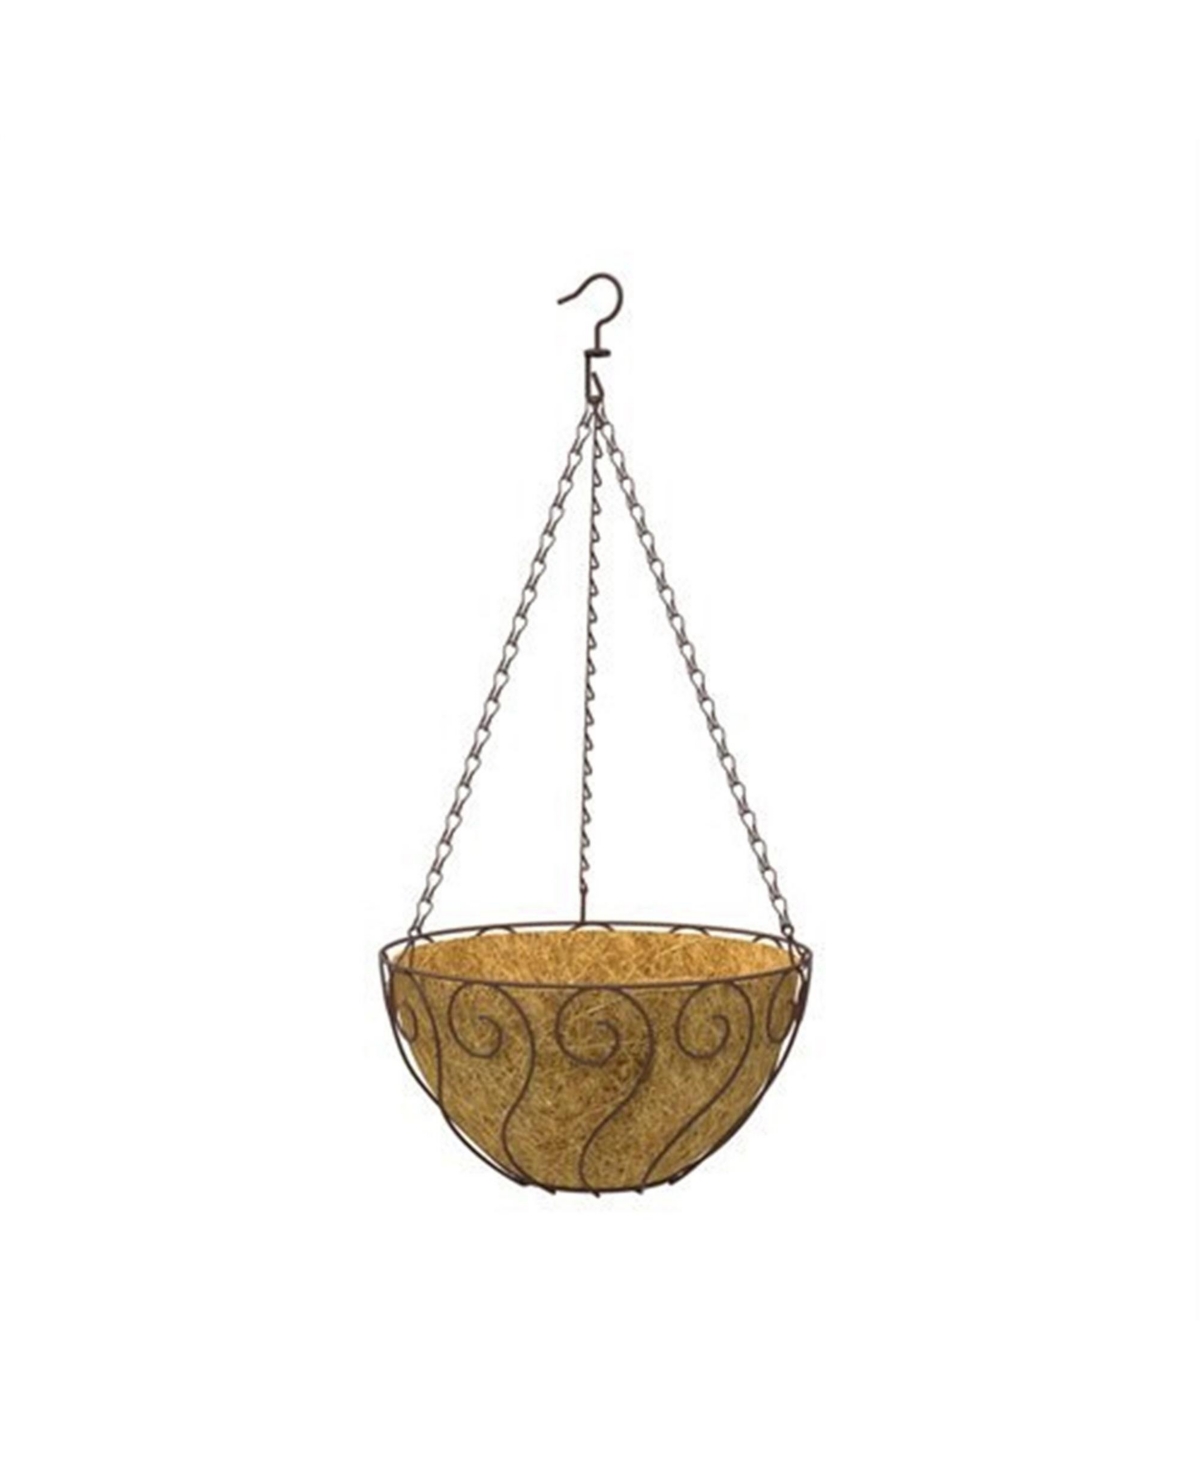 Products Corp-Import 87840 Aztec-Style Hanging Basket, 14-In. - Brown